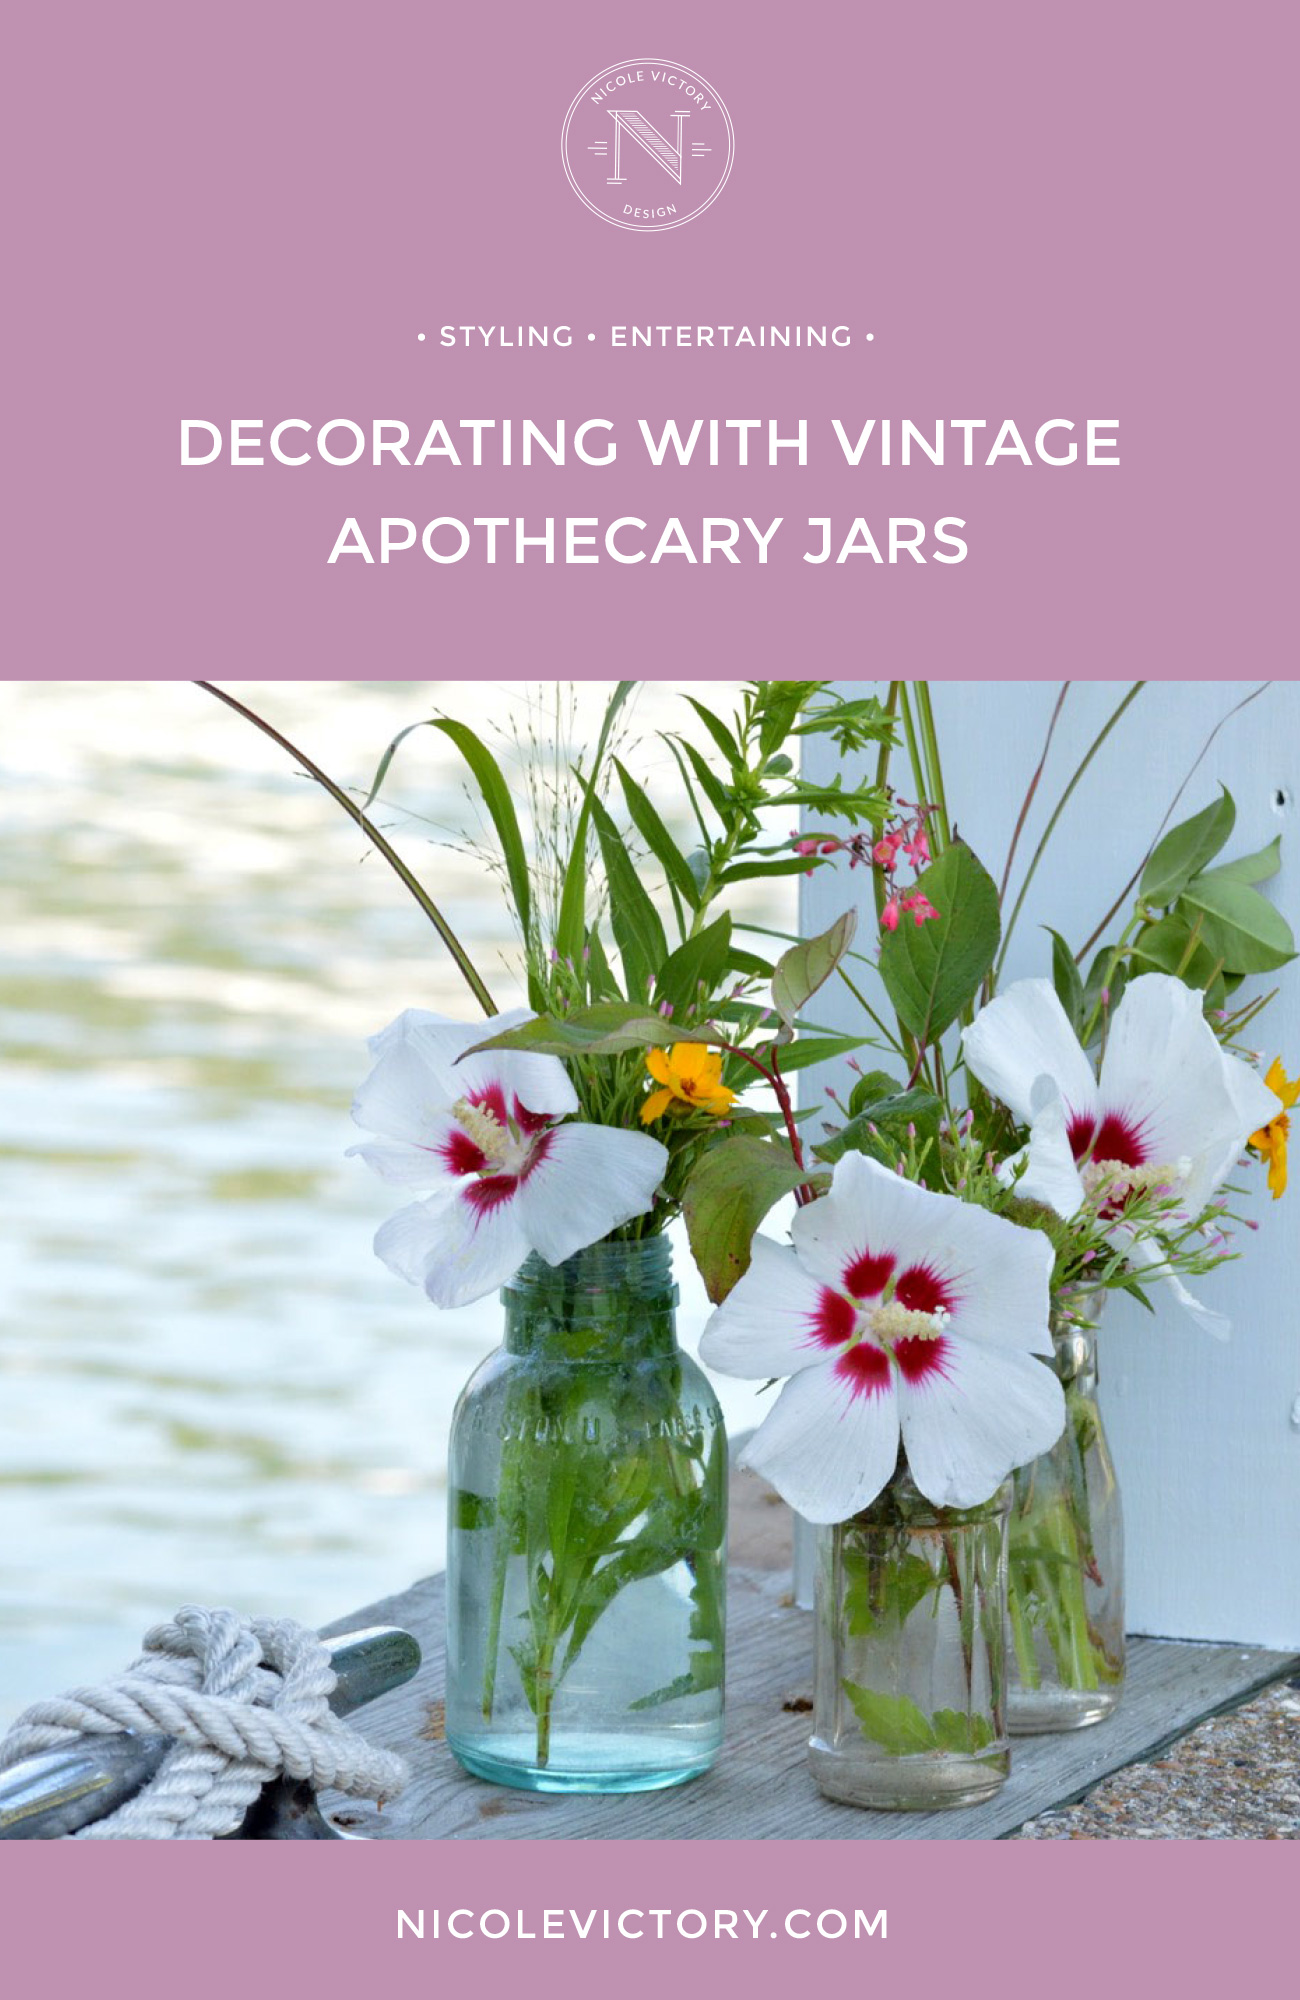 Decorating with Vintage Apothecary Jars | Floral arrangements with vintage apothecary jars | Nicole Victory Design